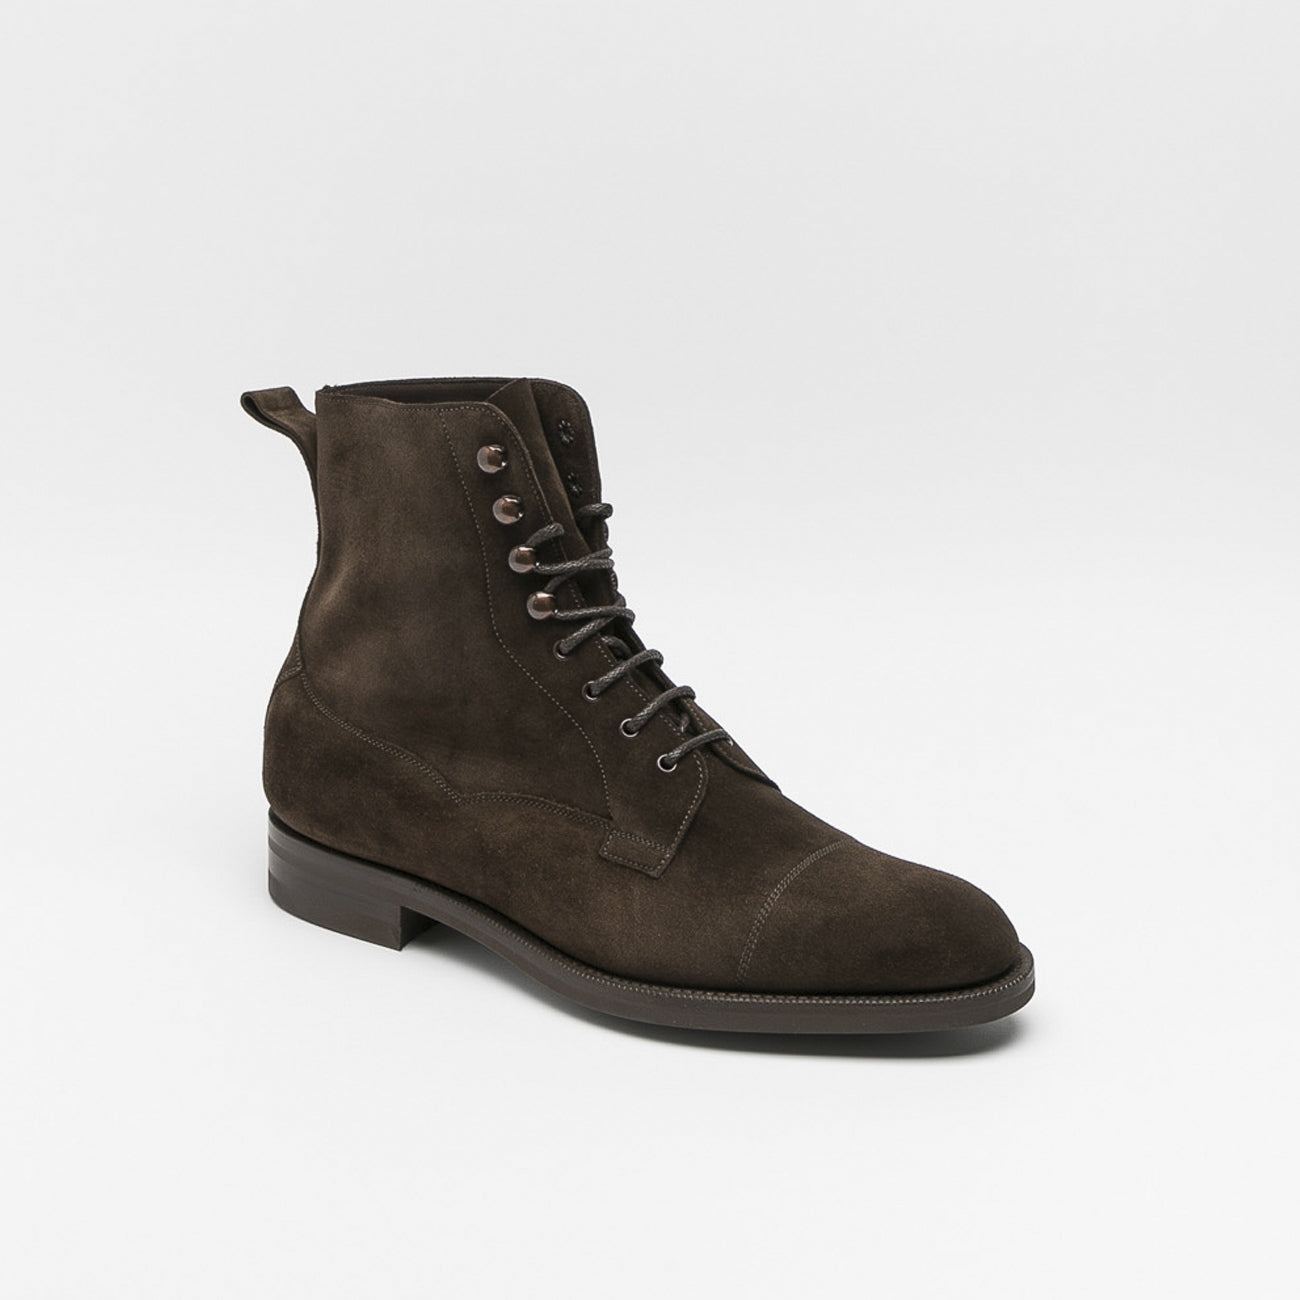 Edward Green Galway mocca suede derby boot